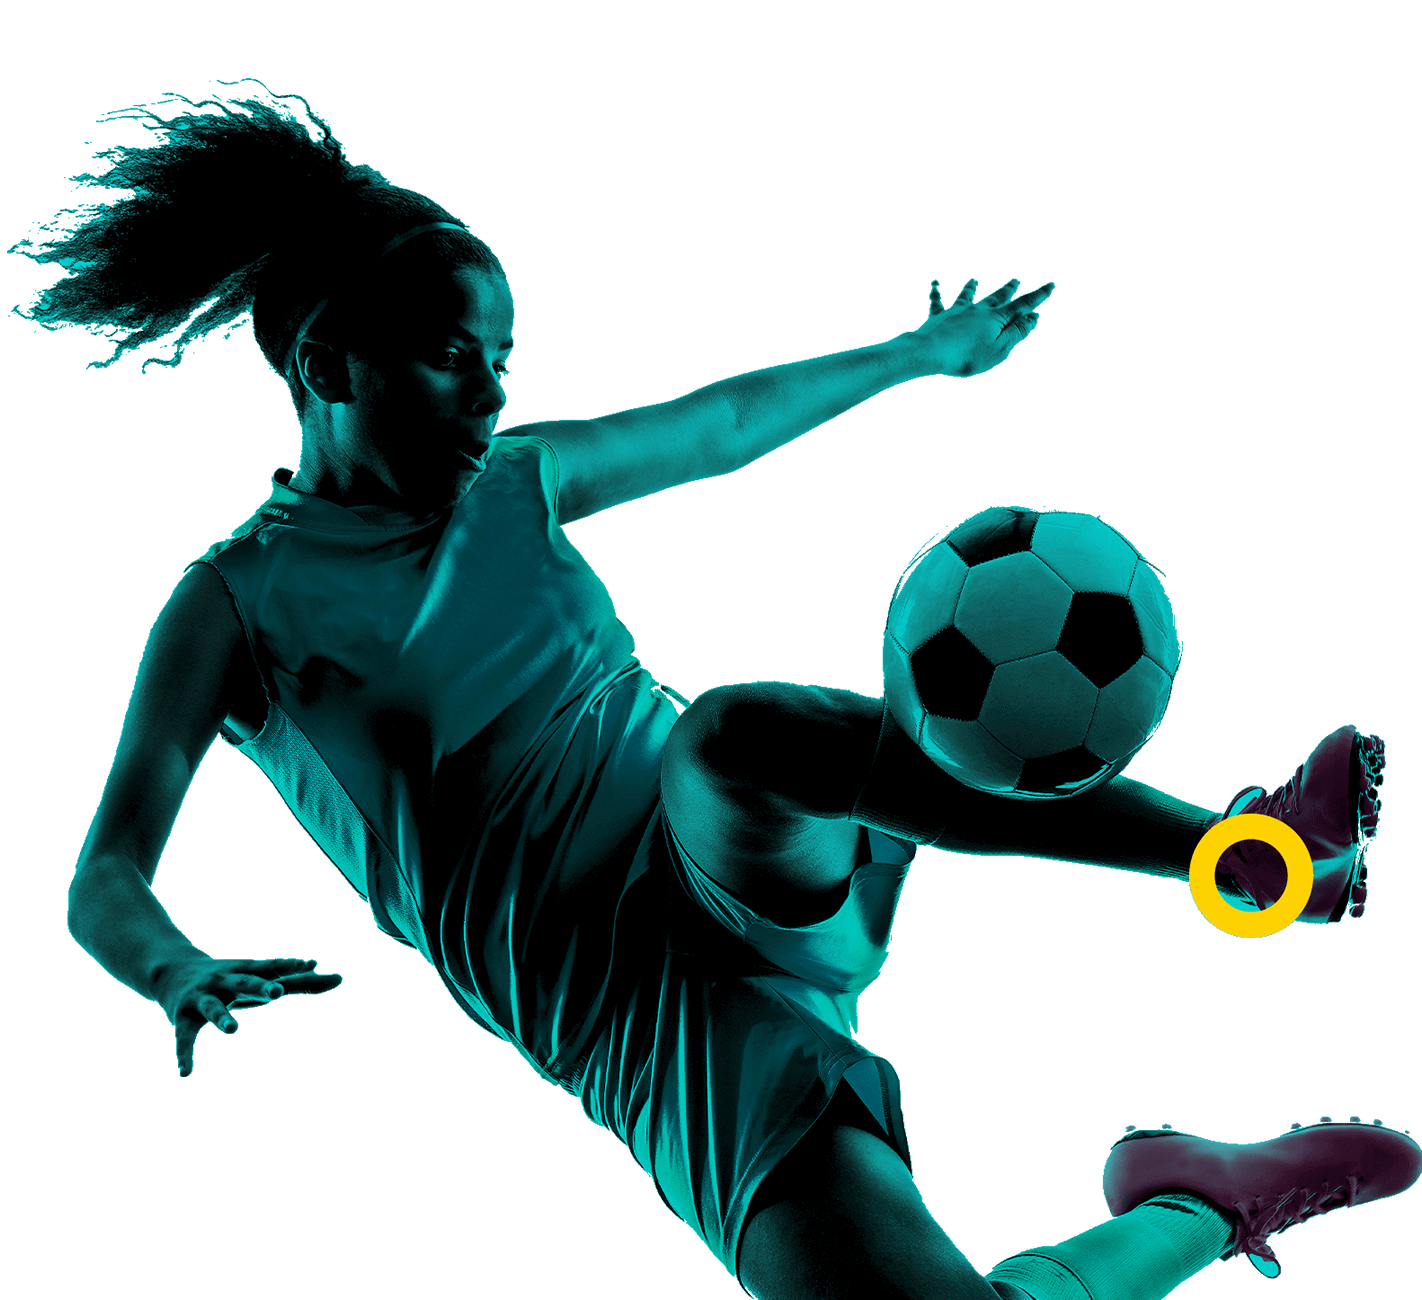 In the picture, a female football player kicks a ball. She jumps and bends to shoot.